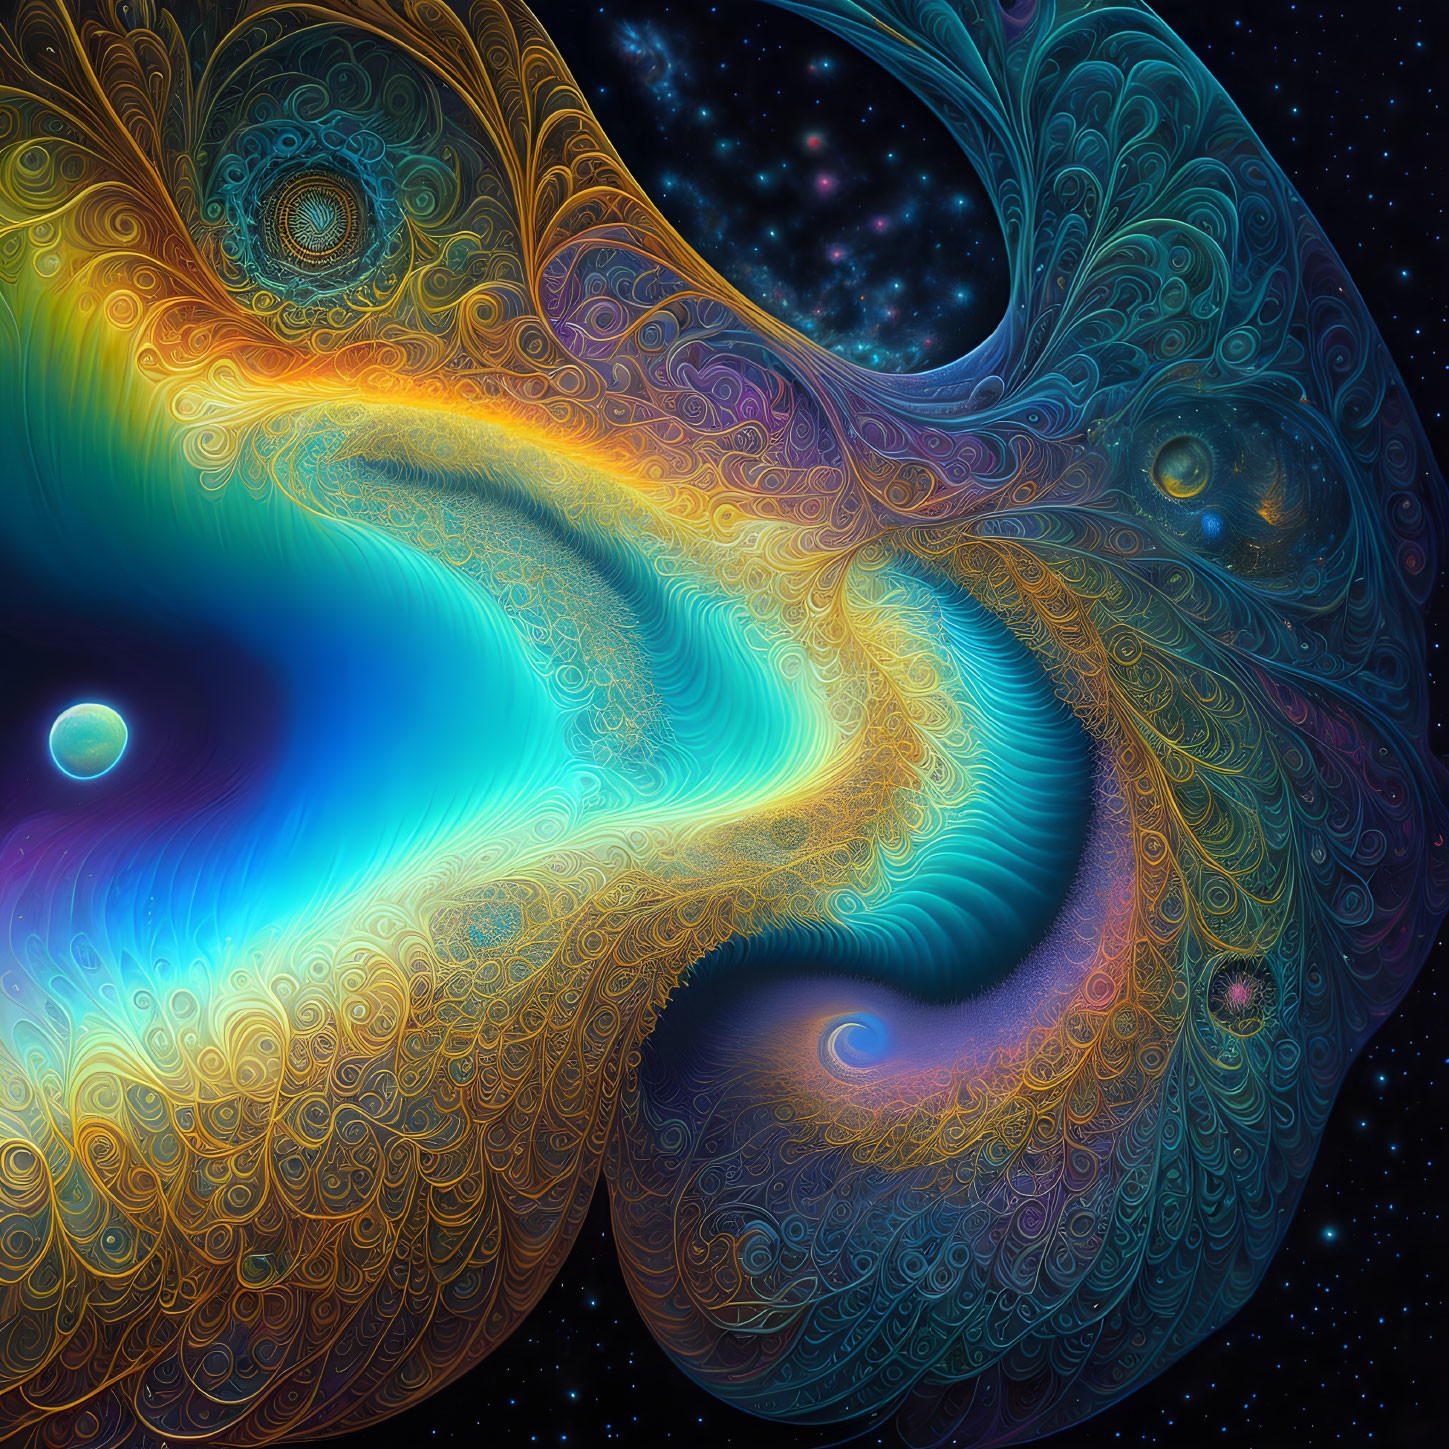 Colorful fractal art: swirling blues, oranges, and purples, cosmic starry space